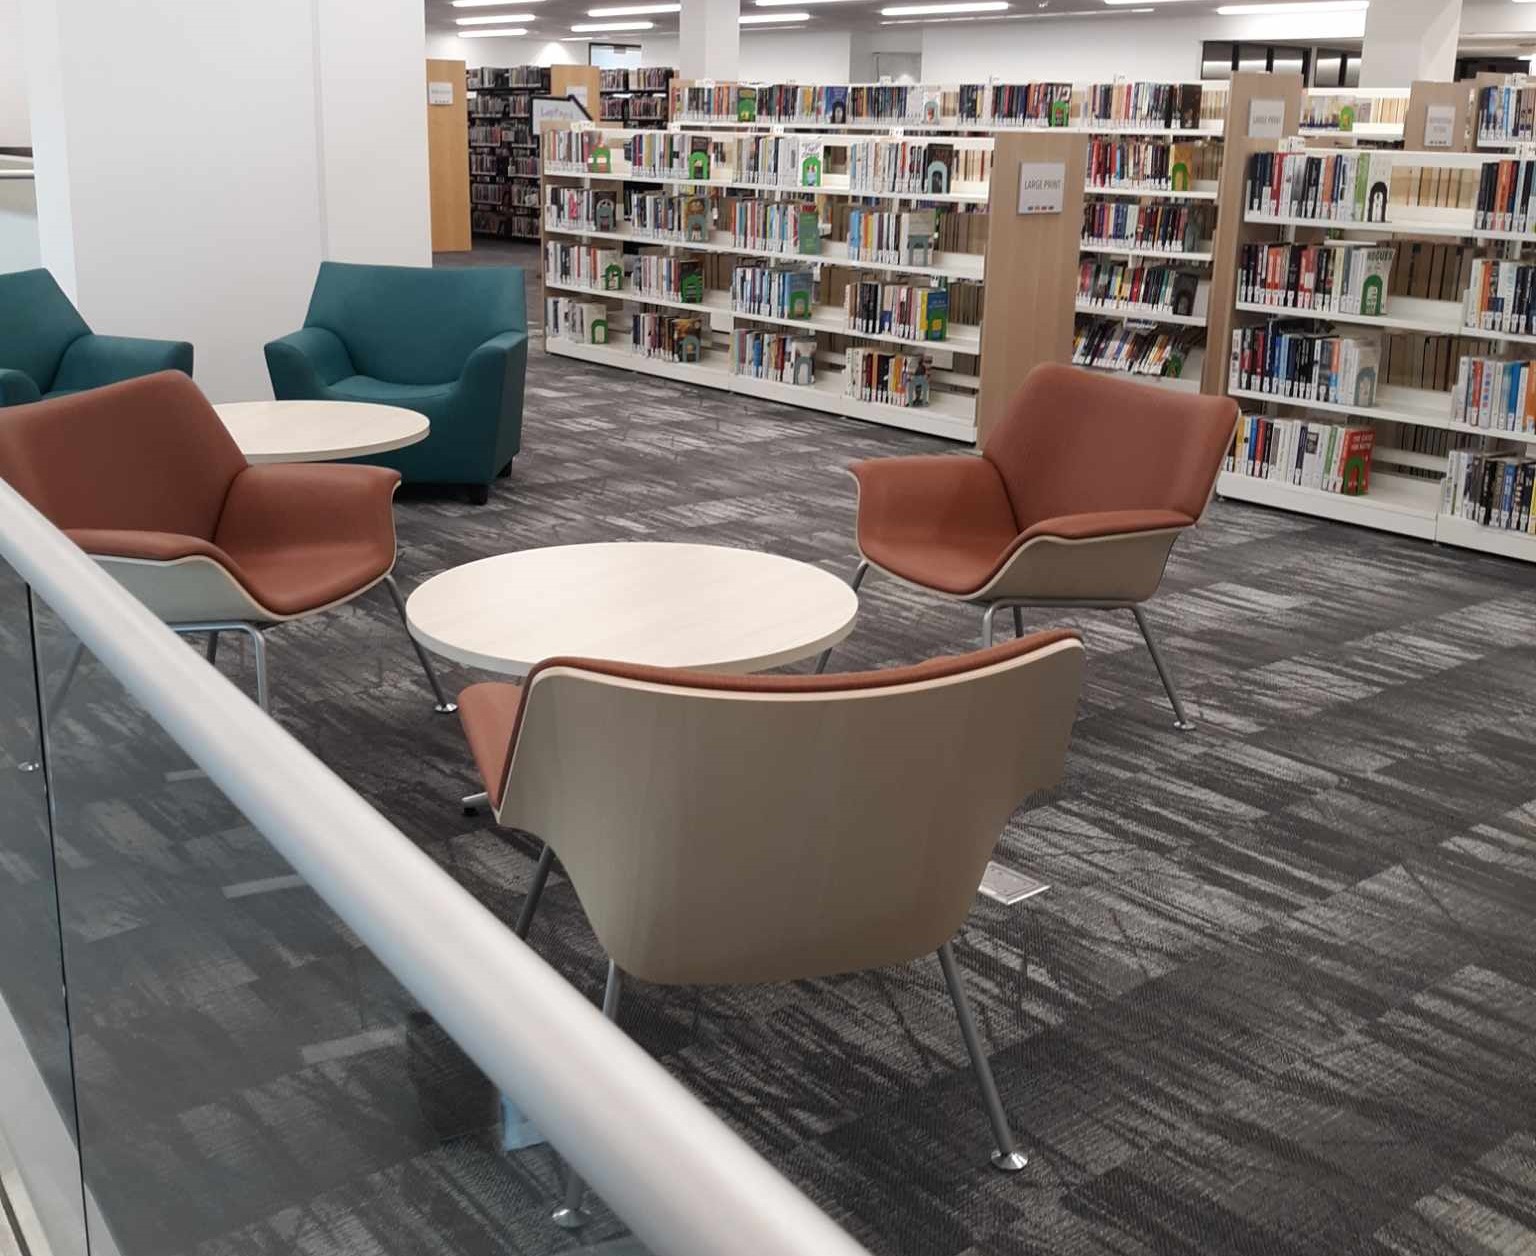 Image of a seating area in the new adult services area